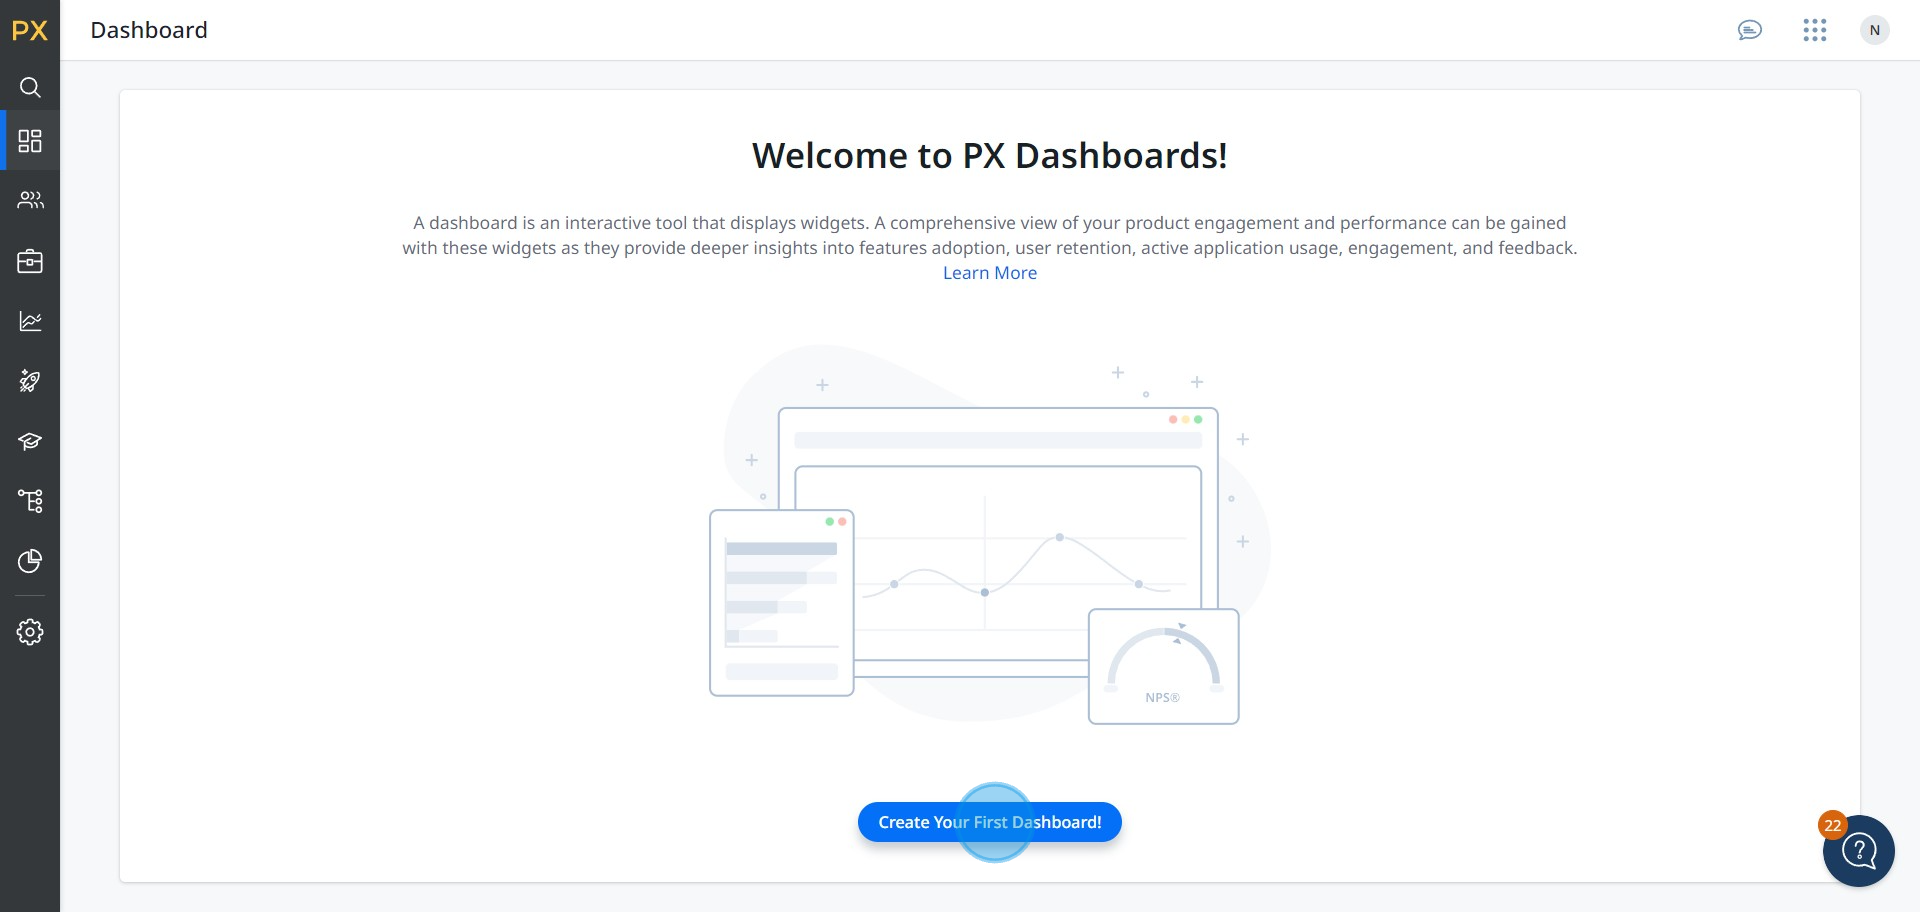 2 Click on "Create Your First Dashboard!"